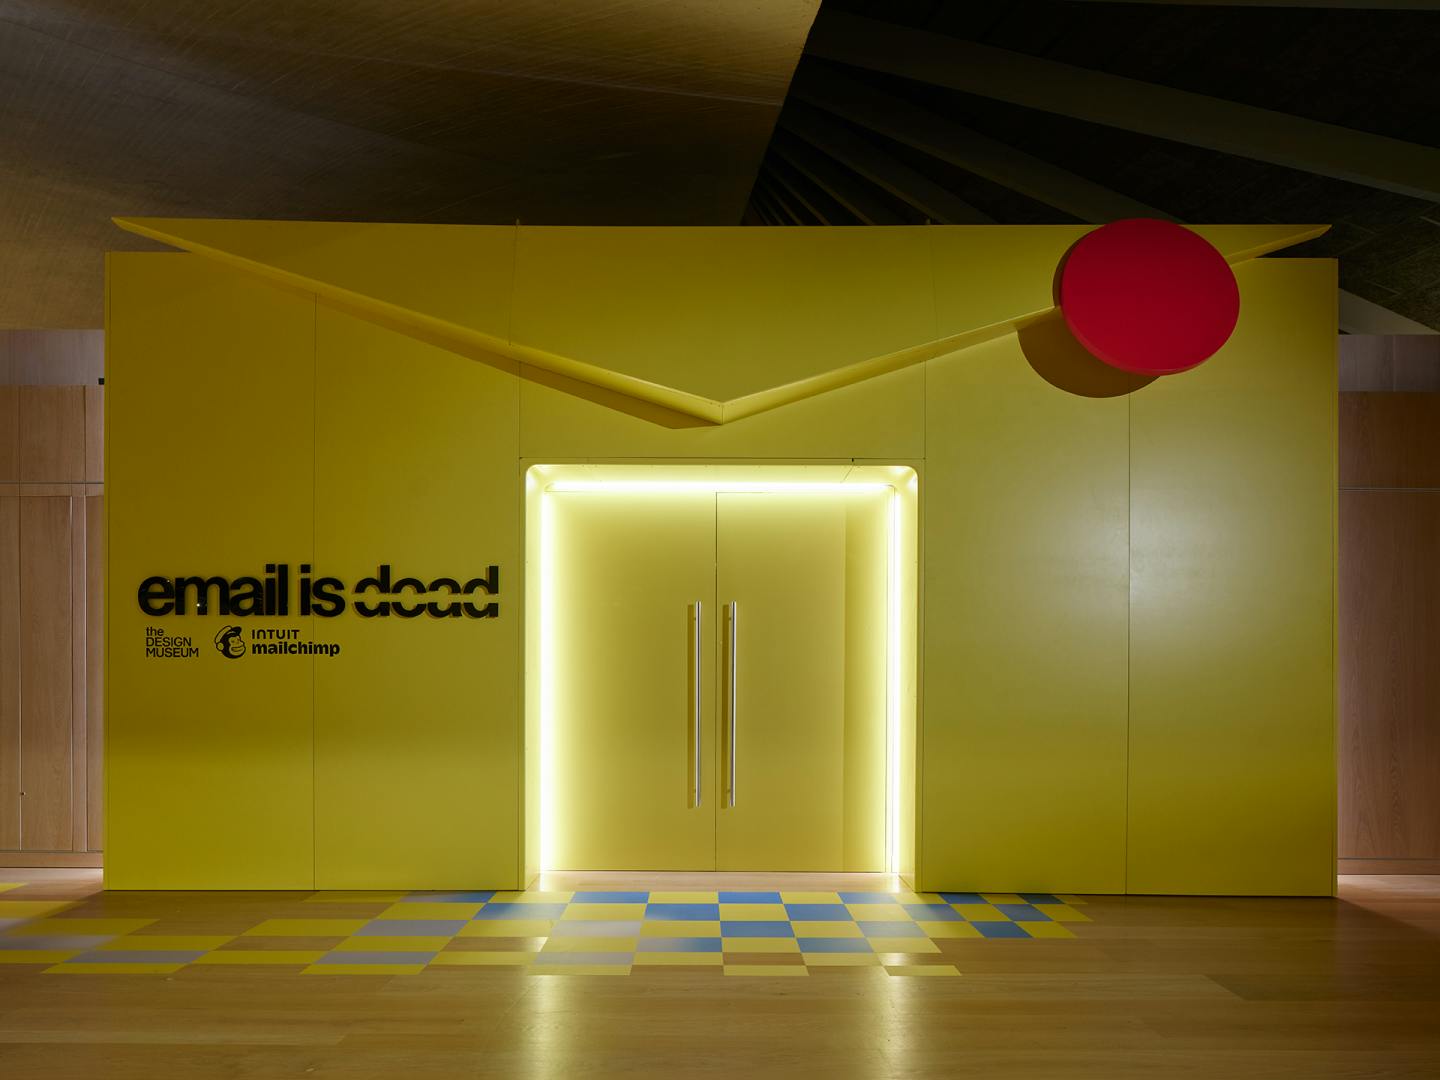 Photo of the entrace to Mailchimp's Email is Dead exhibition at the Design Museum, featuring a doorway in the middle of a large yellow entrance in the shape of an envelope and the exhibition title written on the left of the envelope